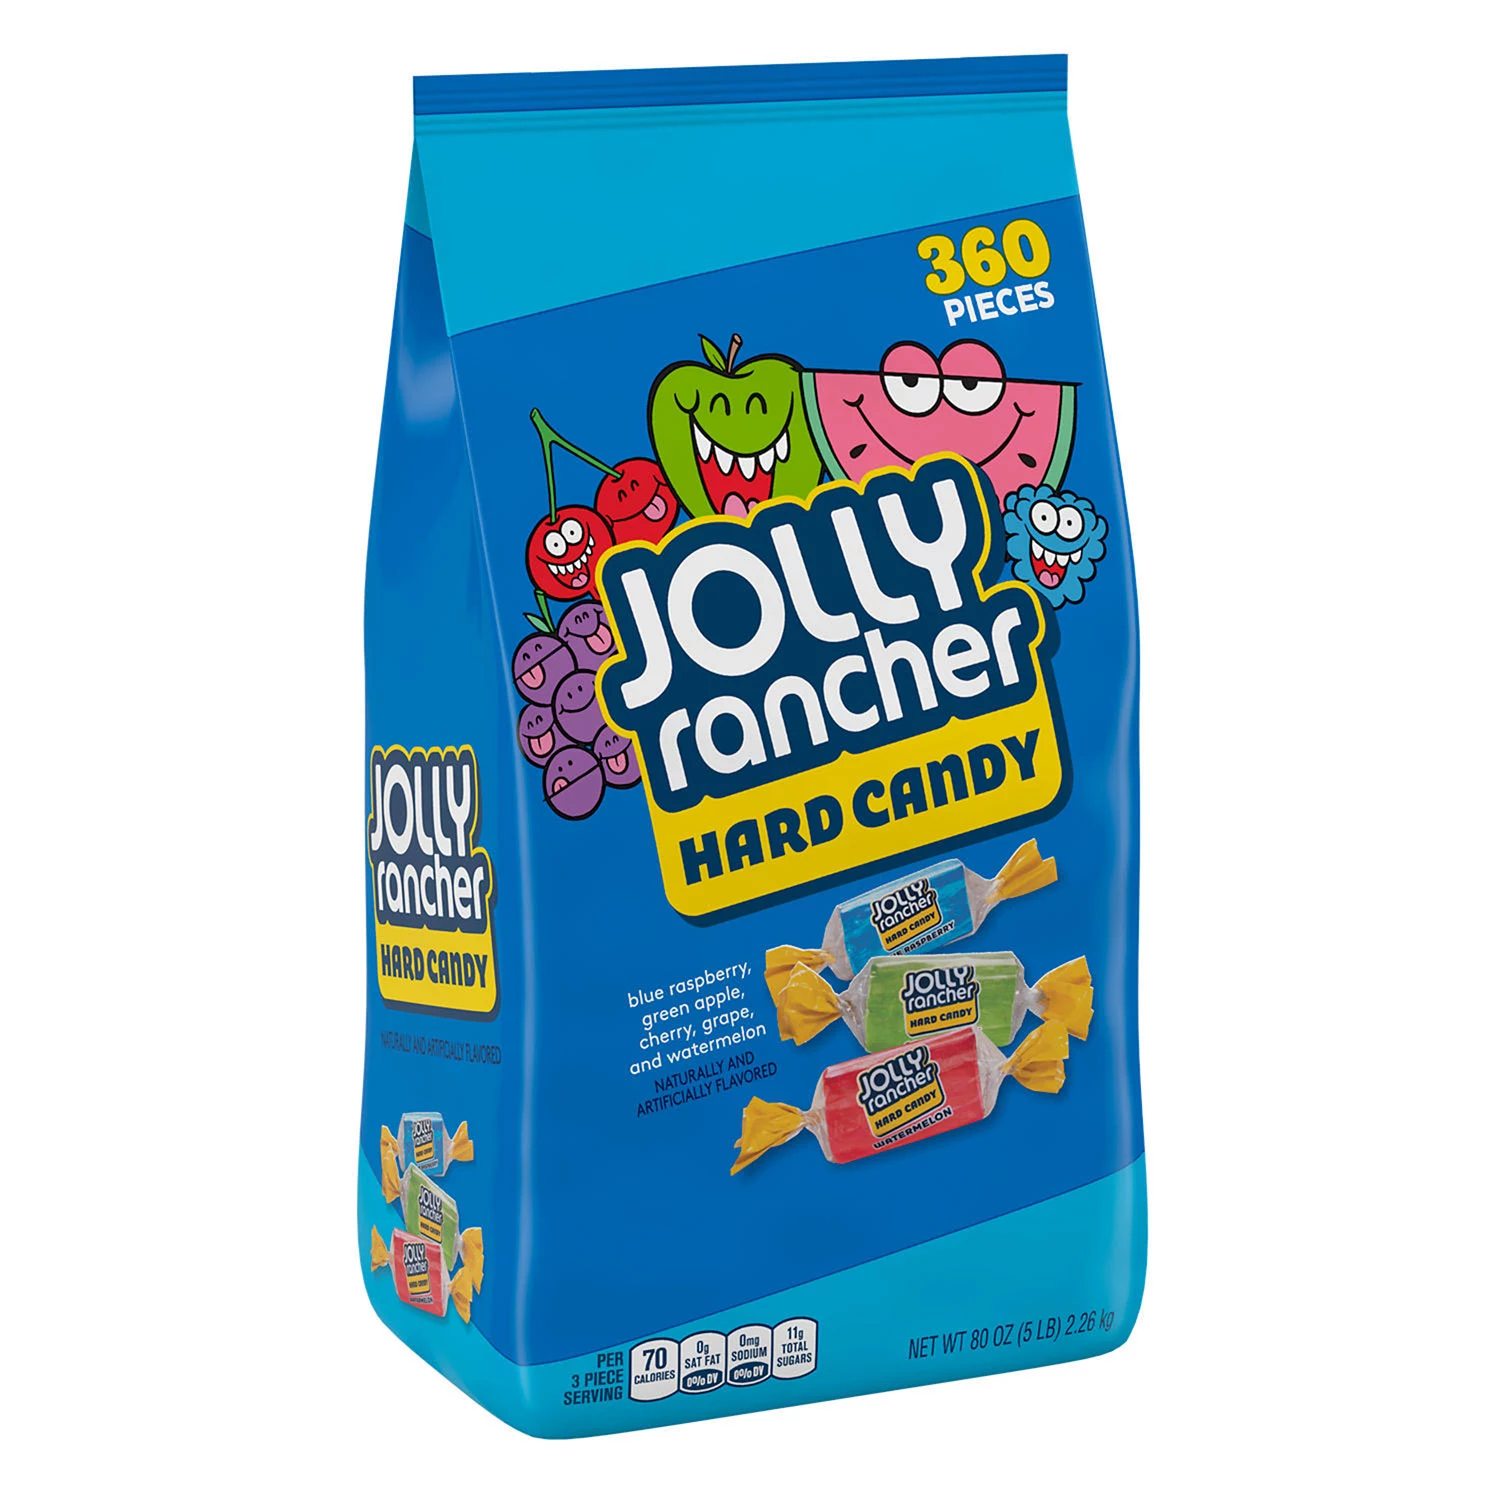 Jolly Rancher Hard Candy (5 lbs., 360 ct.)